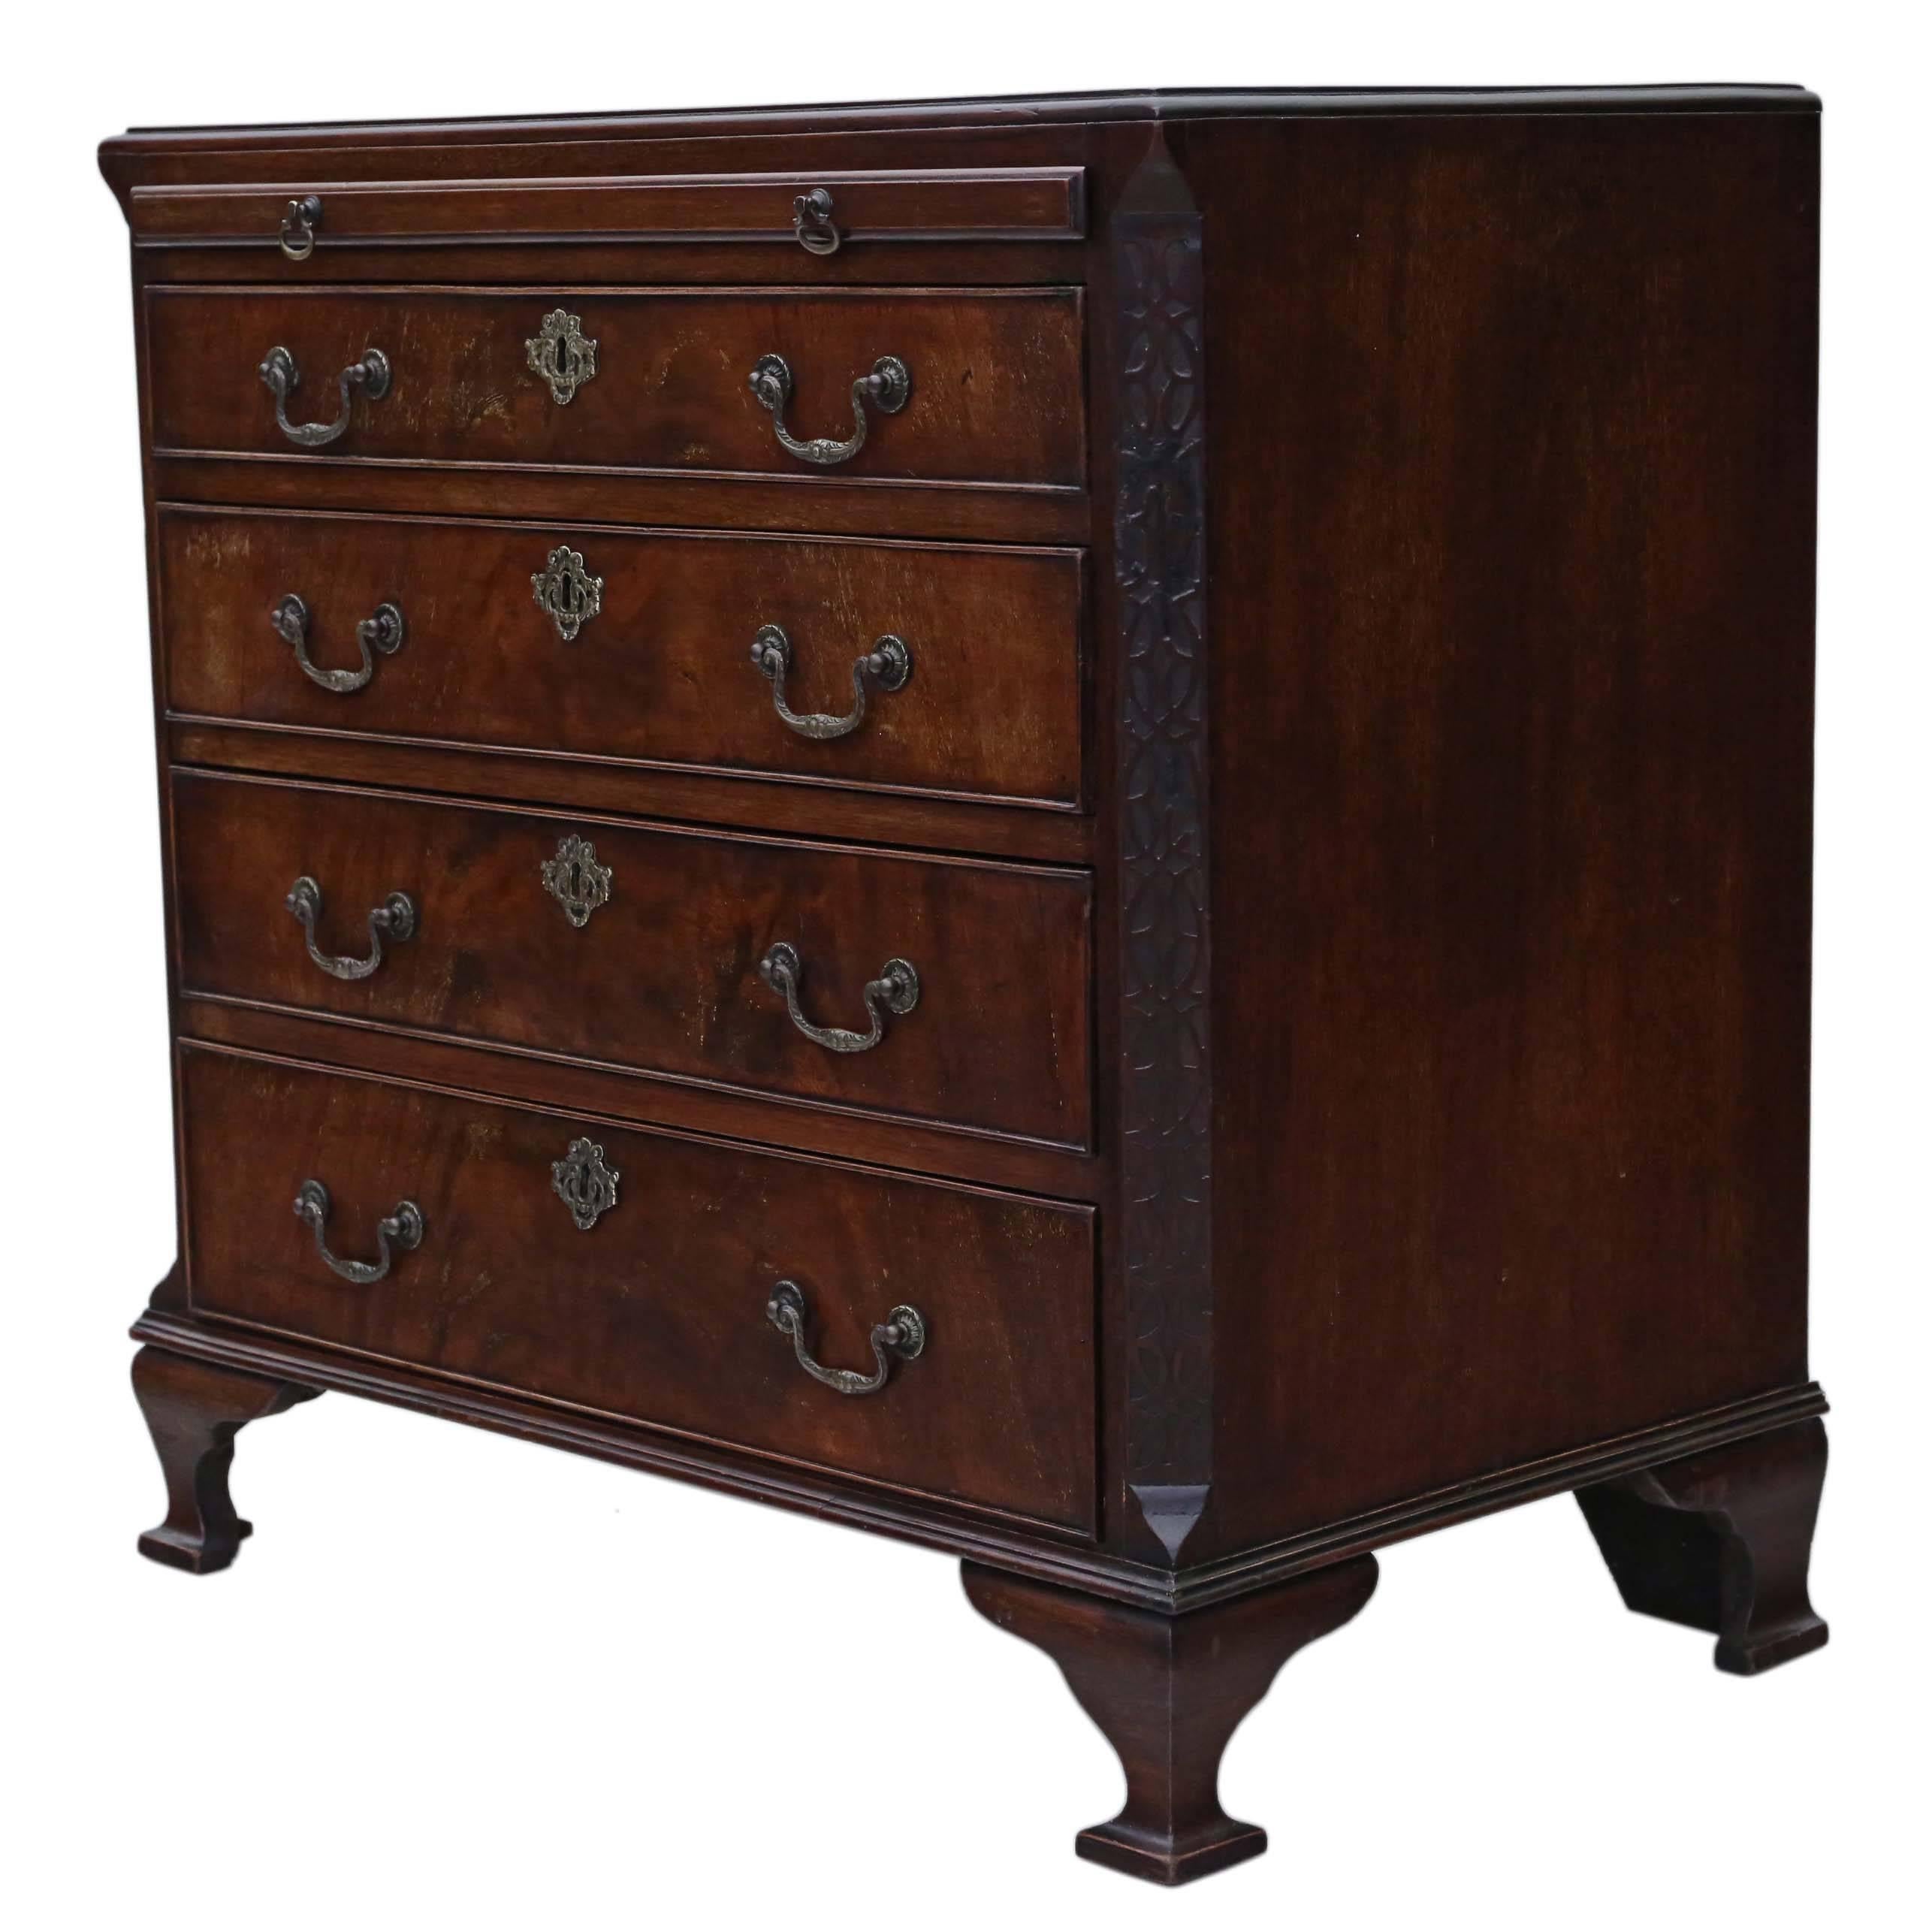 Antique Quality Small Georgian Revival, circa 1910 Mahogany Chest of Drawers In Good Condition For Sale In Wisbech, Walton Wisbech